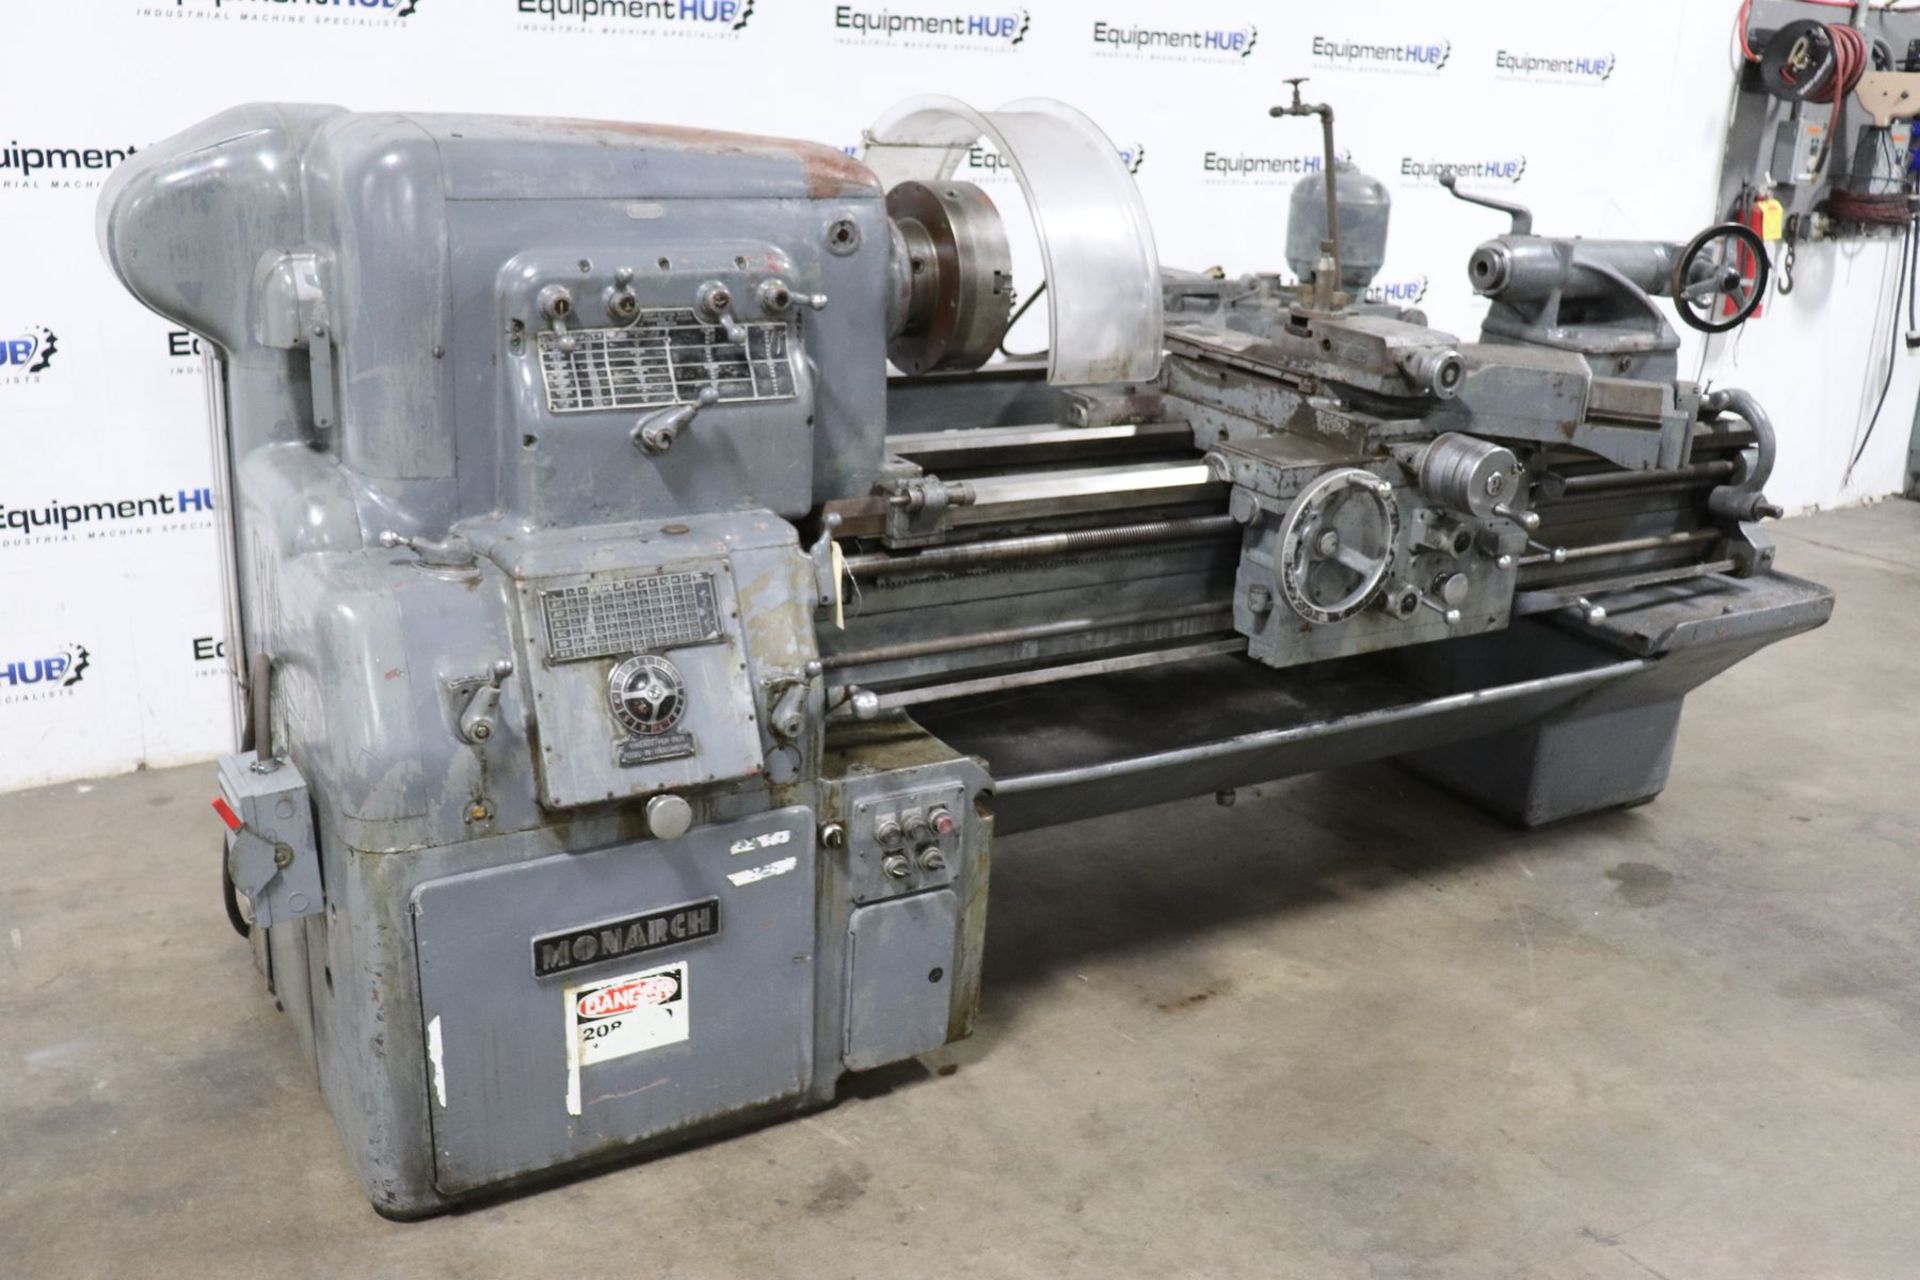 Monarch Model 61 16? / 24? x 54? Engine Lathe with Tracer Attachment - Image 3 of 12